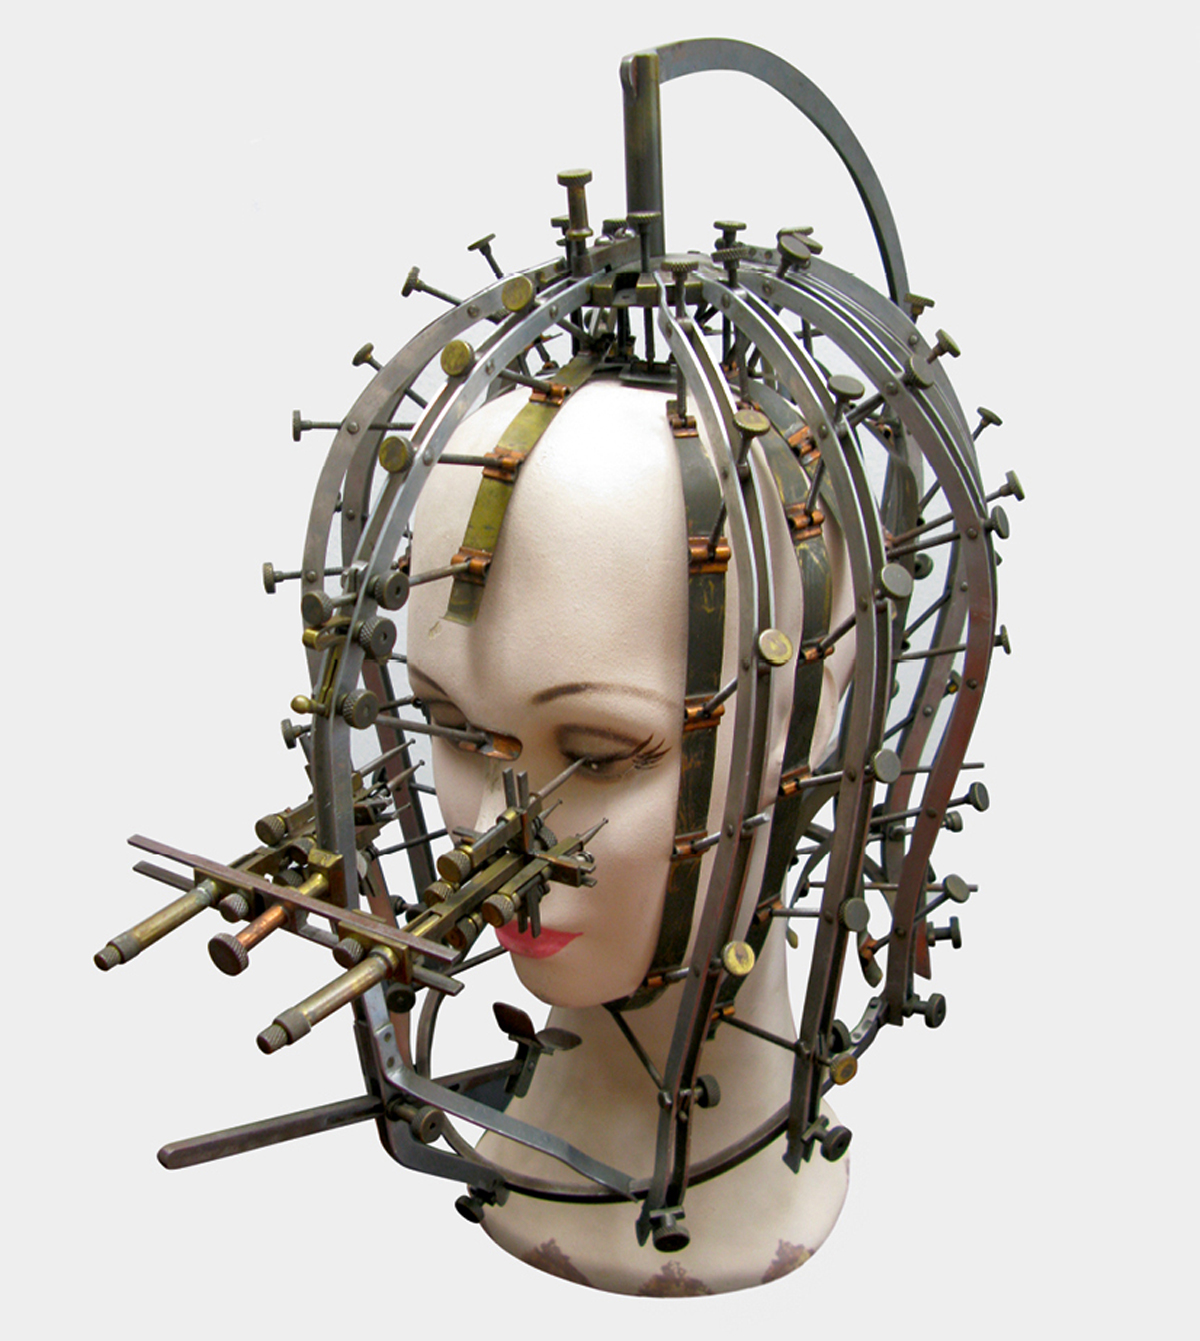 The Beauty Calibrator invented by Factor in 1932. The device, which measured the degree to which a person’s face and head differed from what was deemed to be ideal, was used to determine the most effective makeup solution. Photo Kristin Beeler.